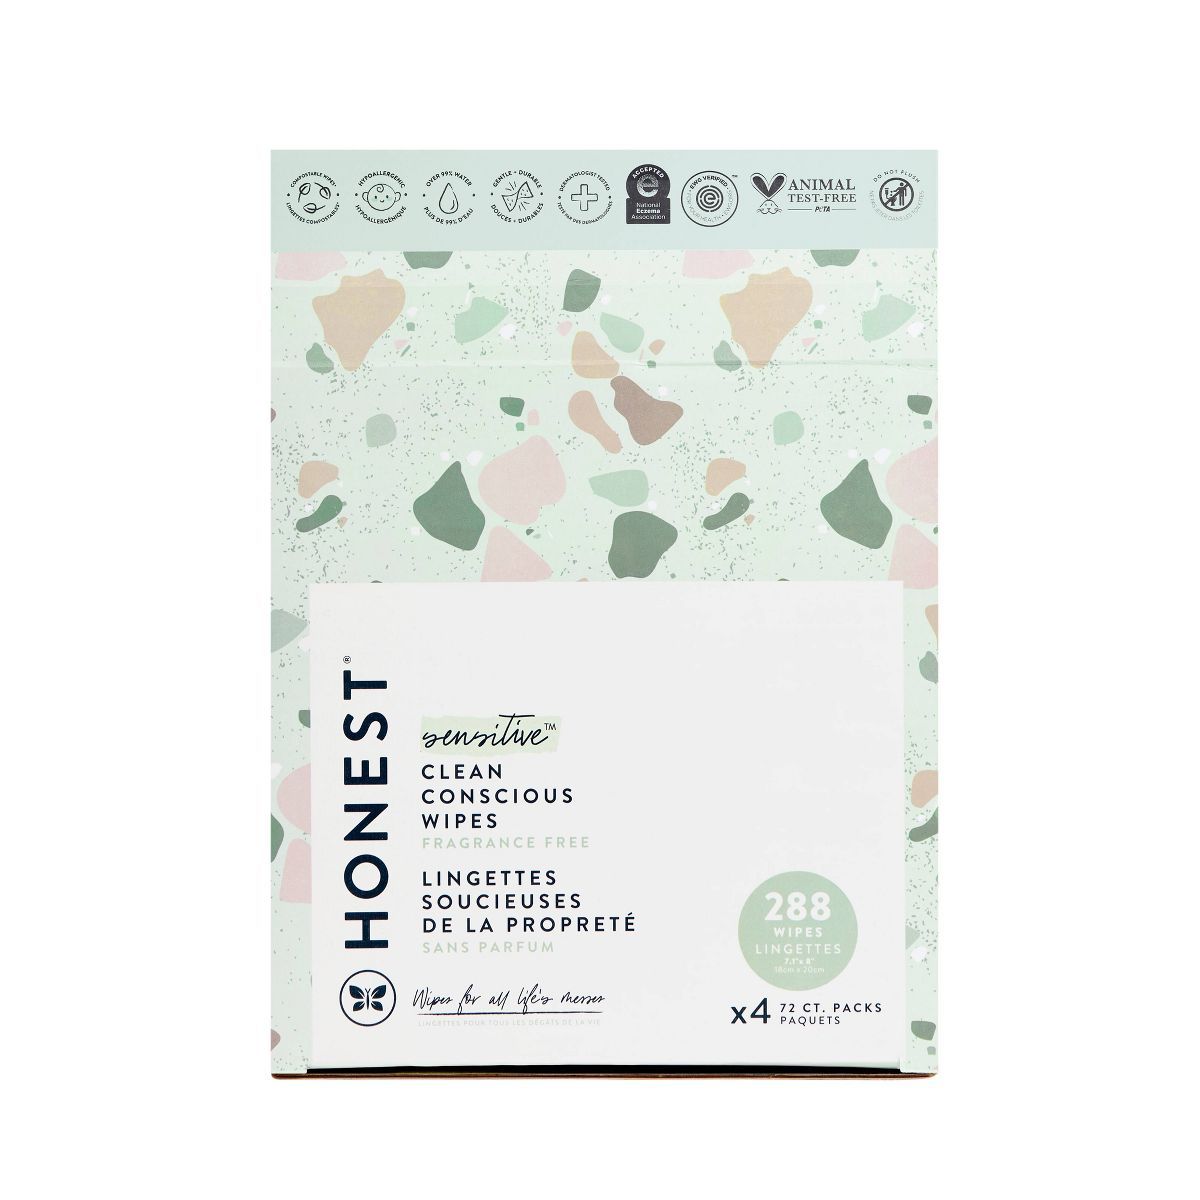 The Honest Company Plant-Based Baby Wipes made with over 99% Water - Classic(Select Count) | Target